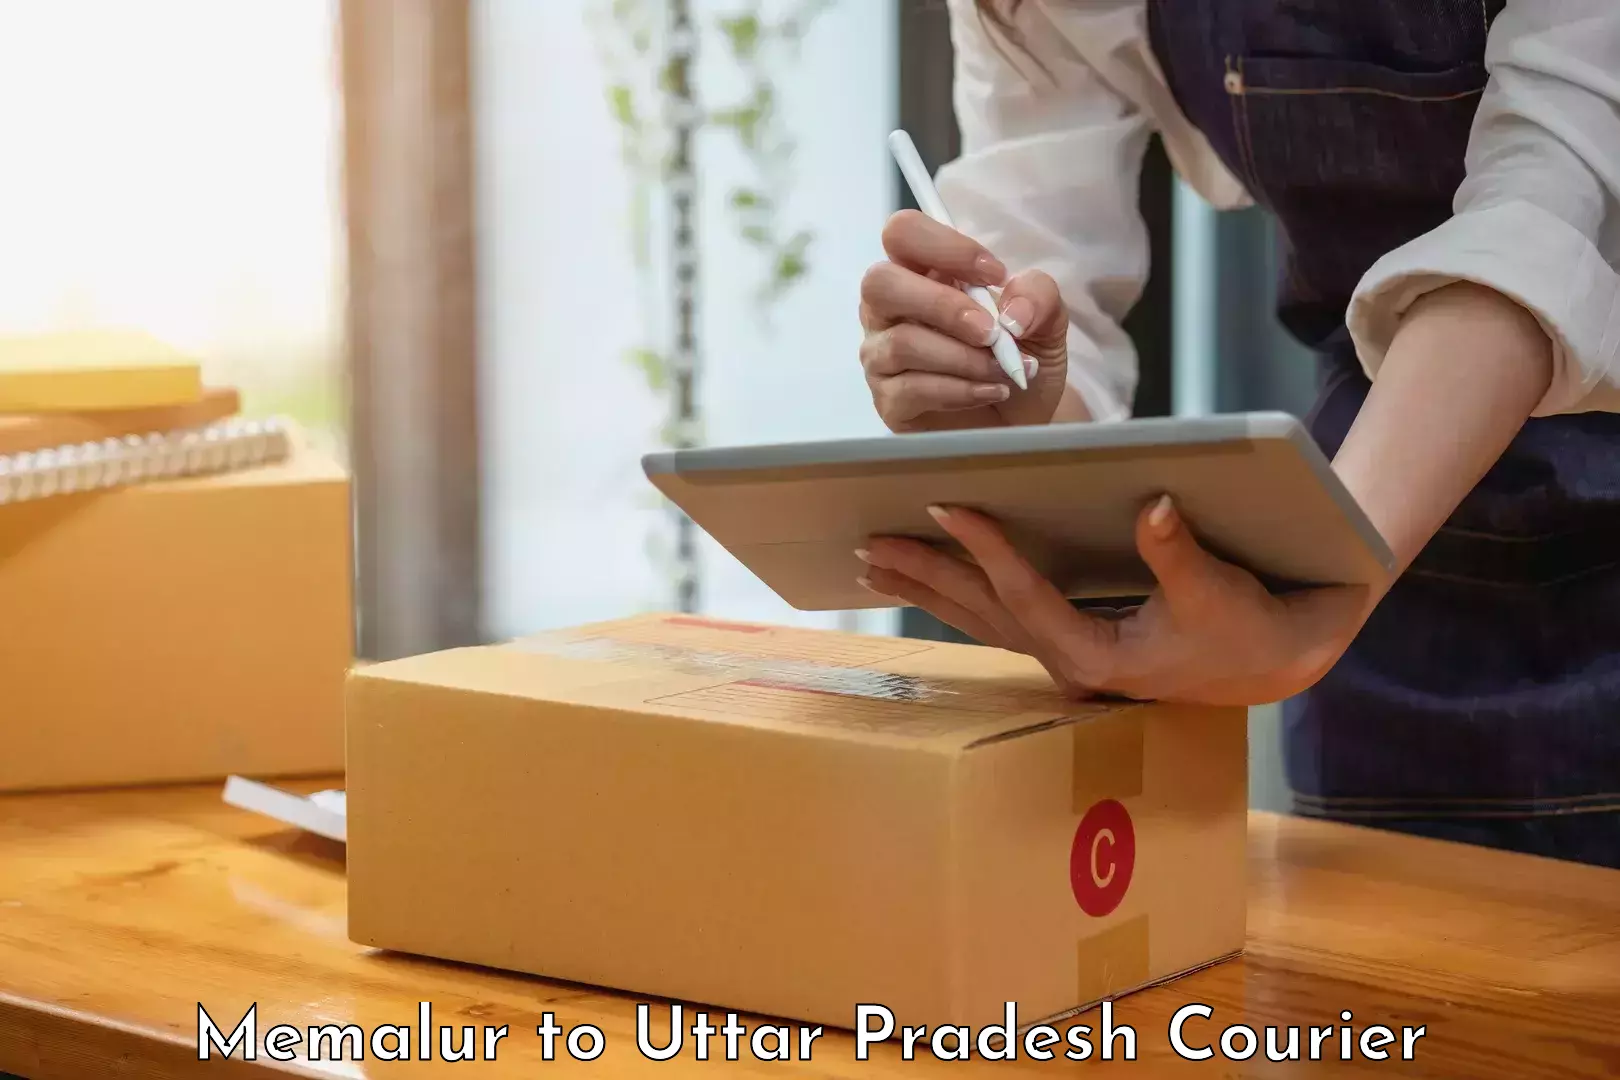 Round-the-clock parcel delivery Memalur to Fatehabad Agra